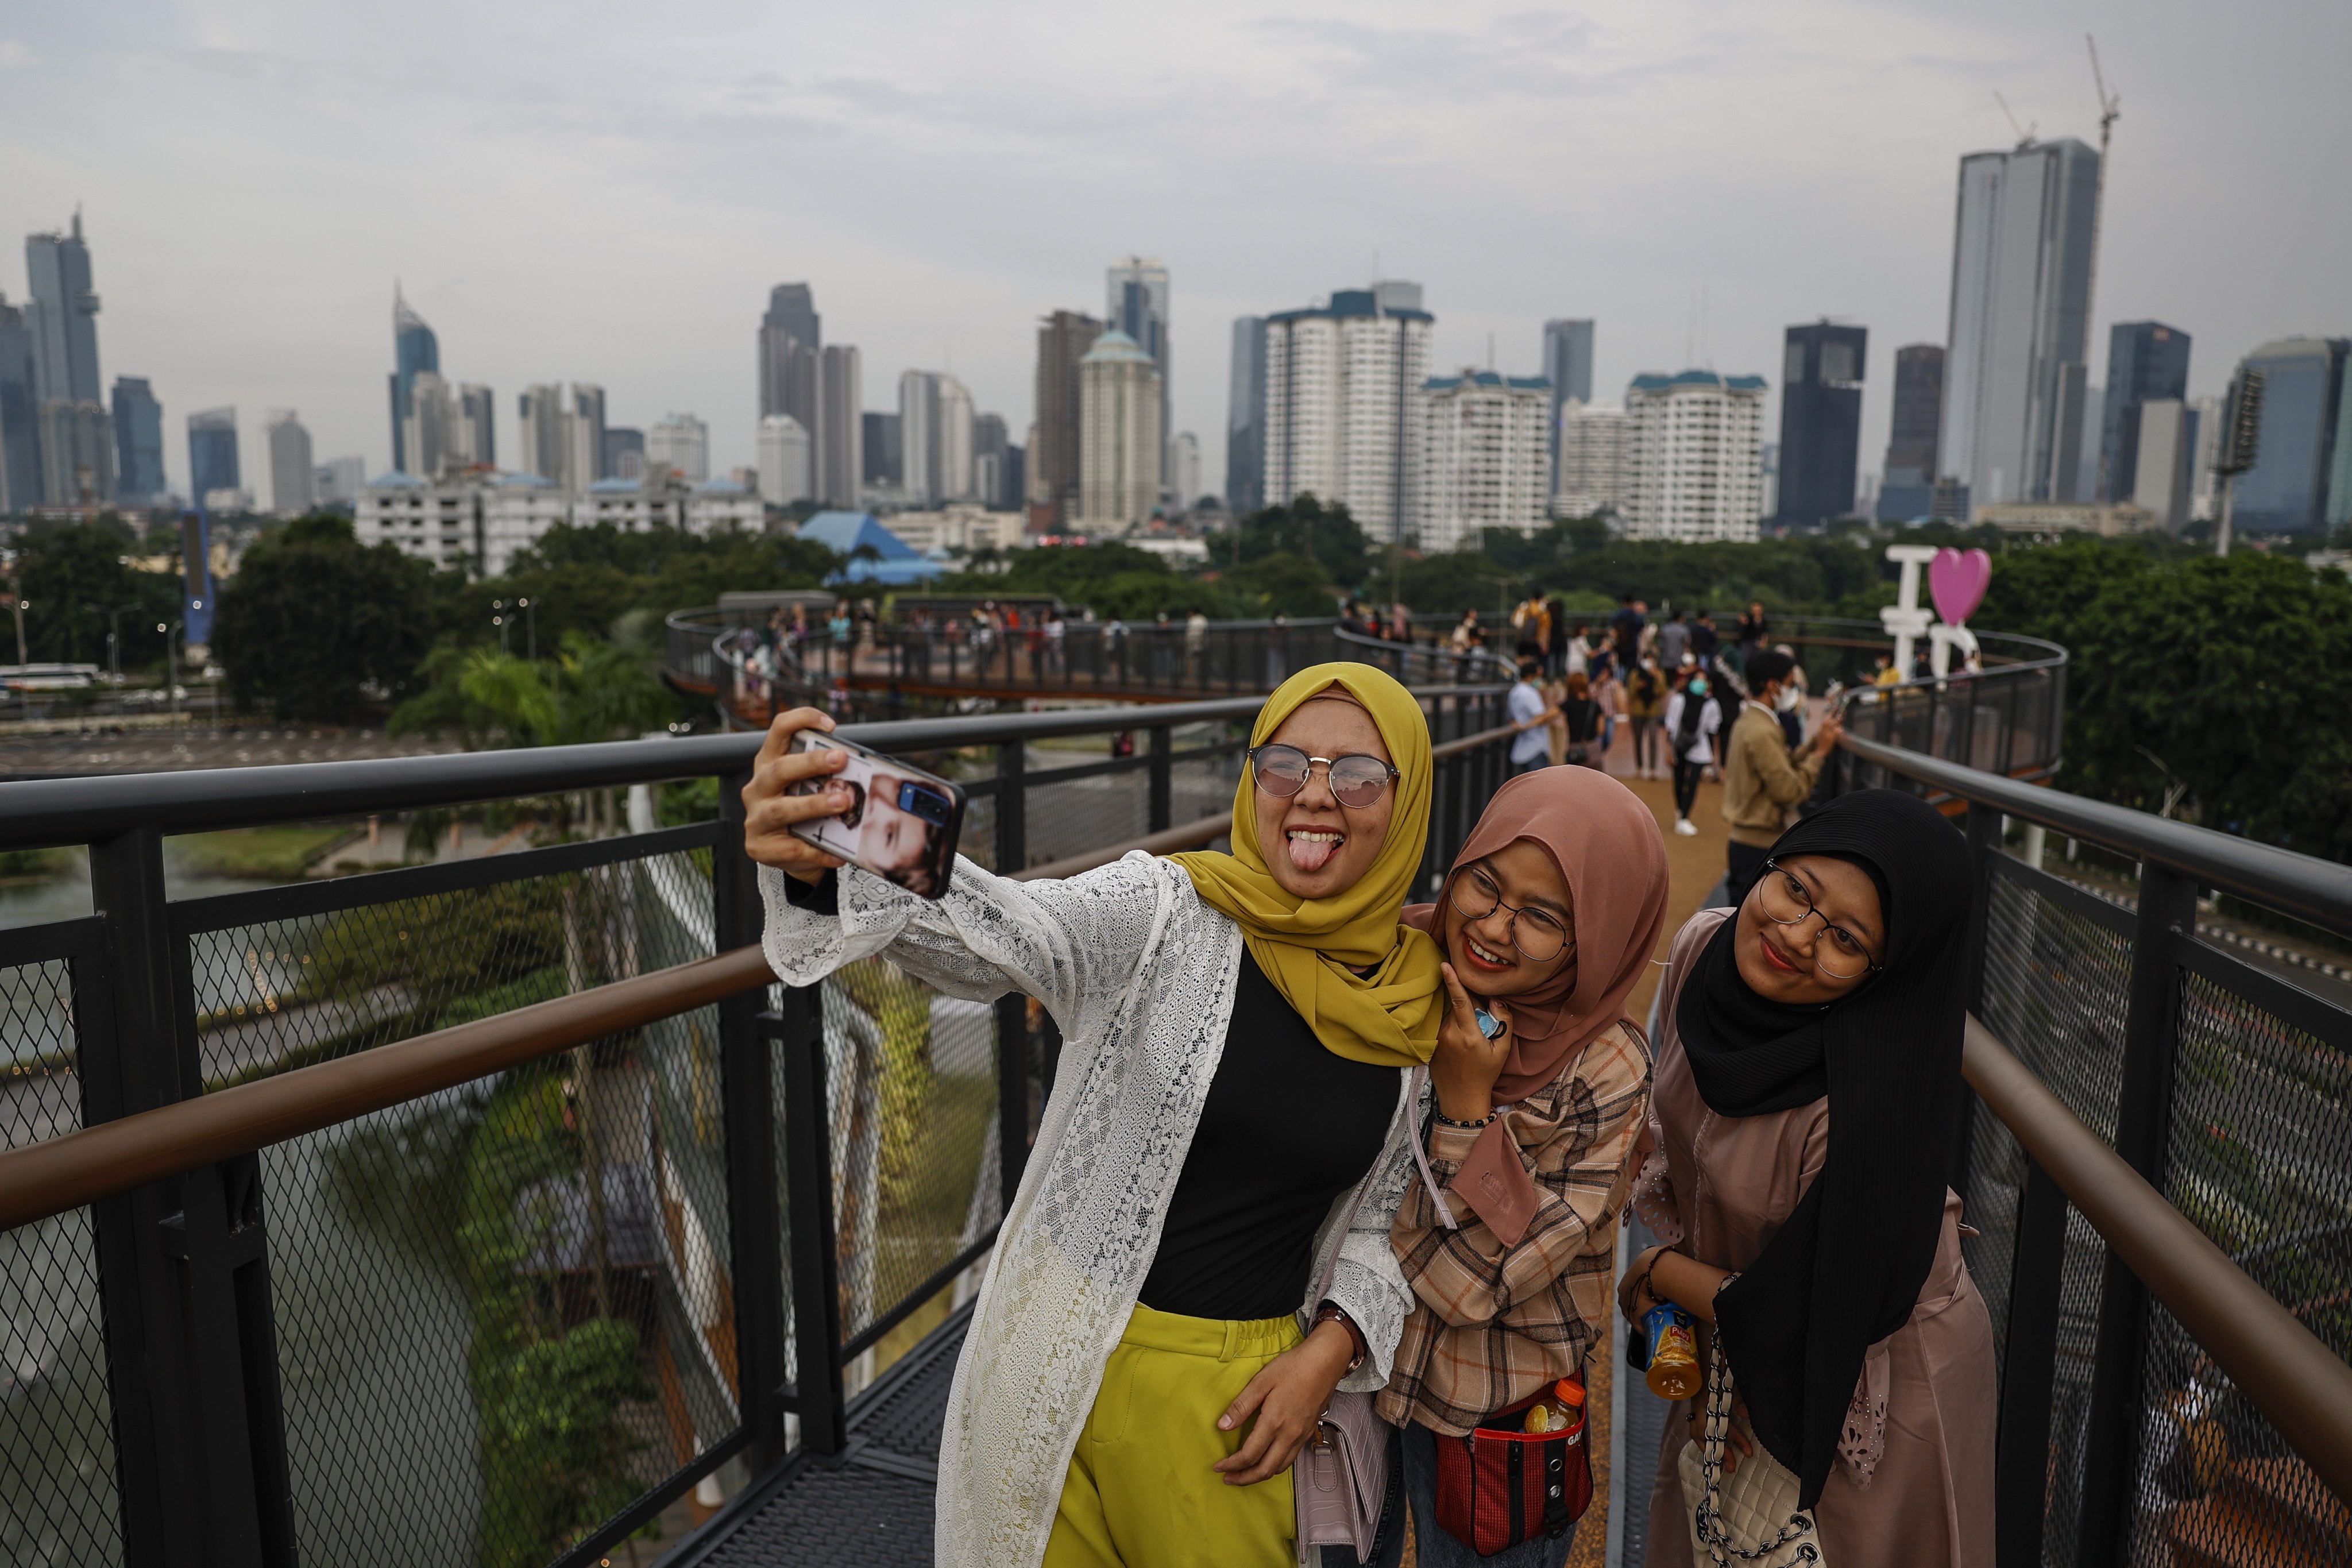 Teenagers take a selfie on a skywalk in Jakarta in 2021. With a youthful demographic eager to embrace new technologies and an internet economy projected to pass US$300 billion by 2025, Southeast Asia is a vast market ripe for disruption and growth. Photo: EPA-EFE